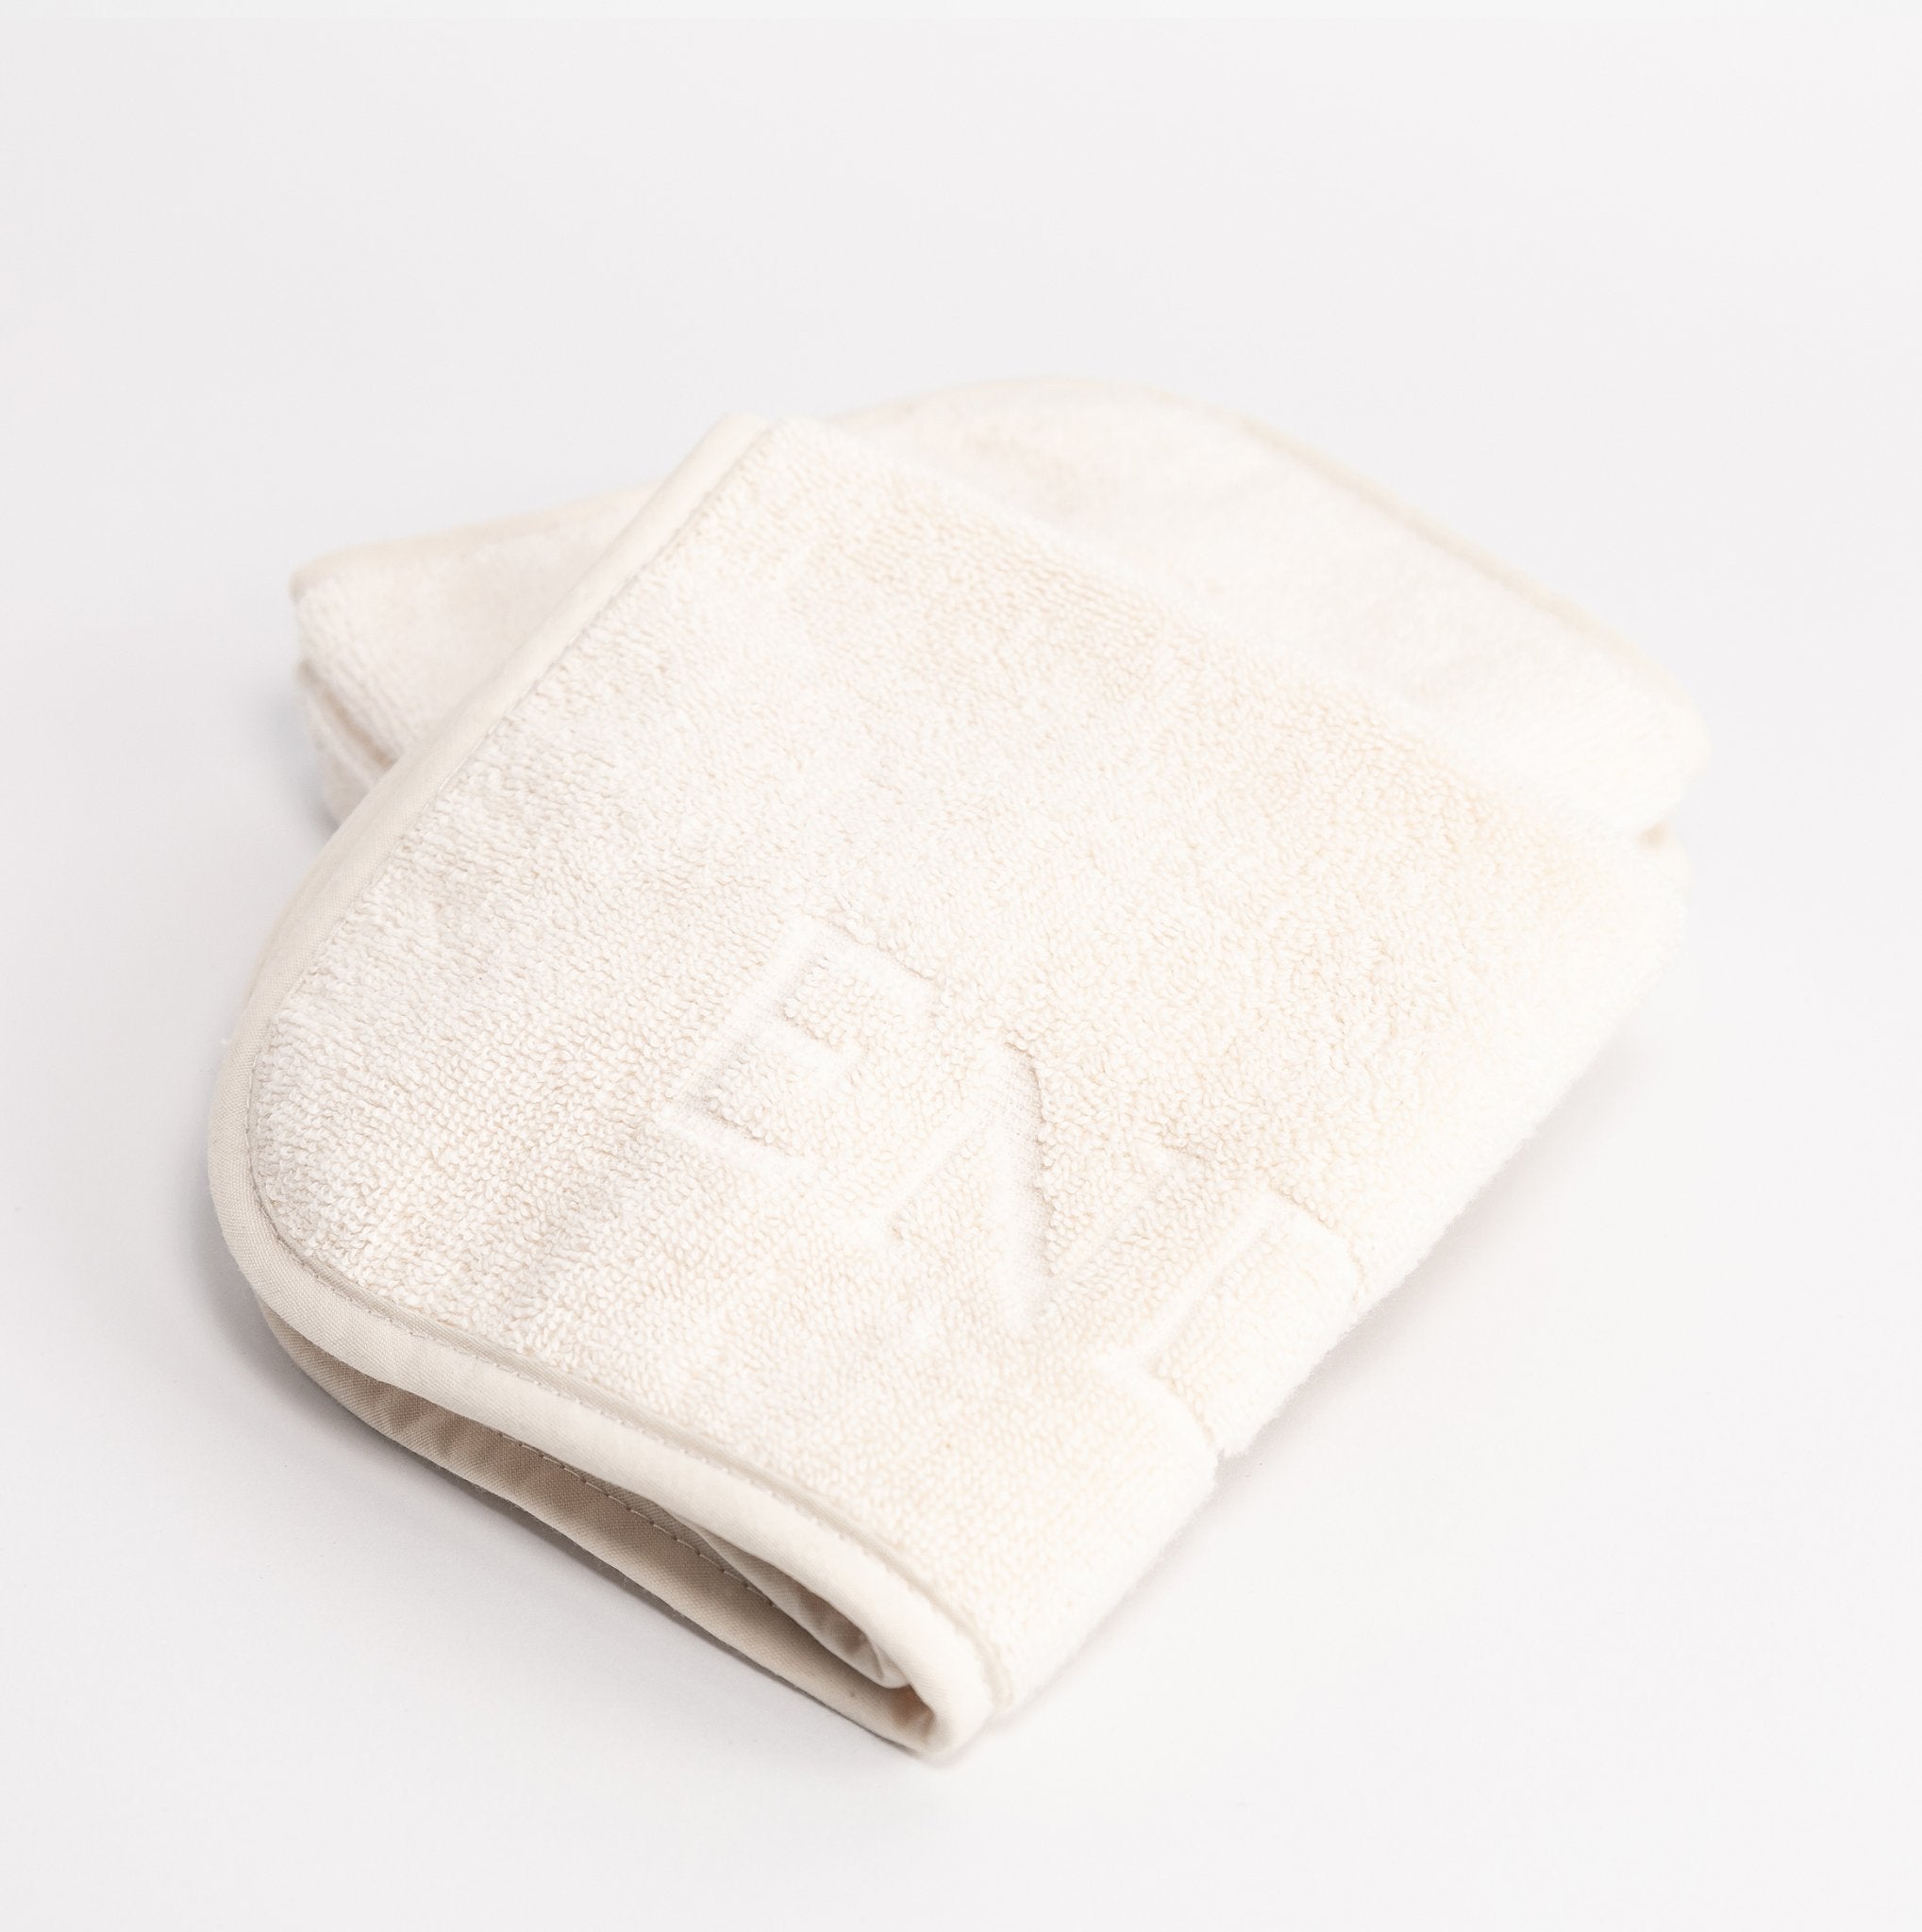 The Best Bath Towels For Your Face And Body